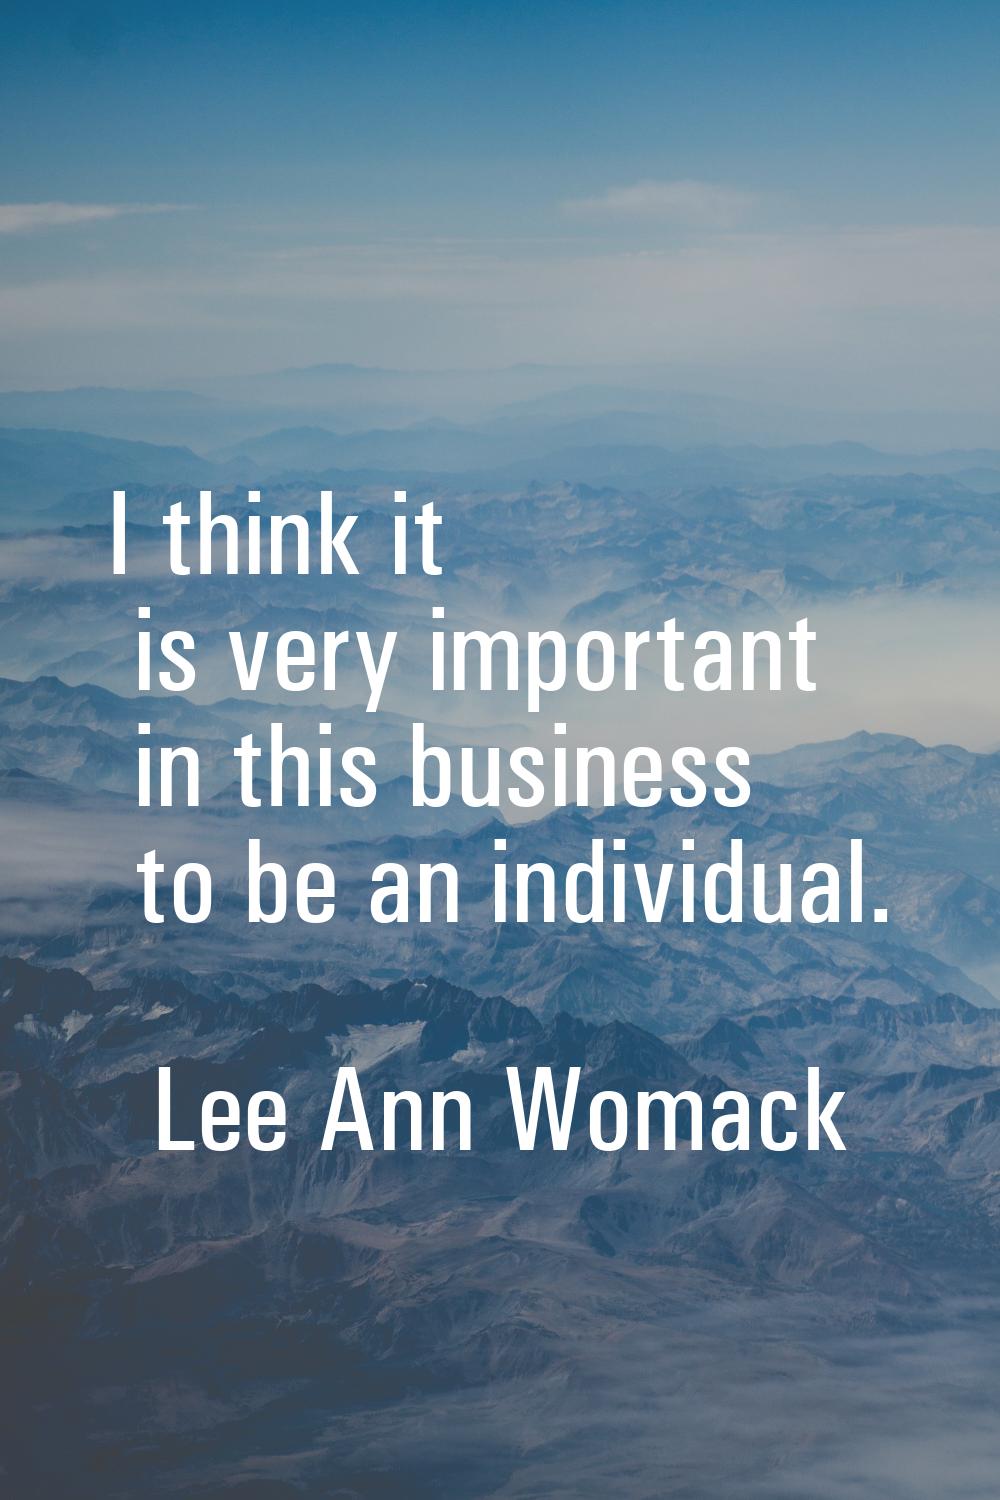 I think it is very important in this business to be an individual.